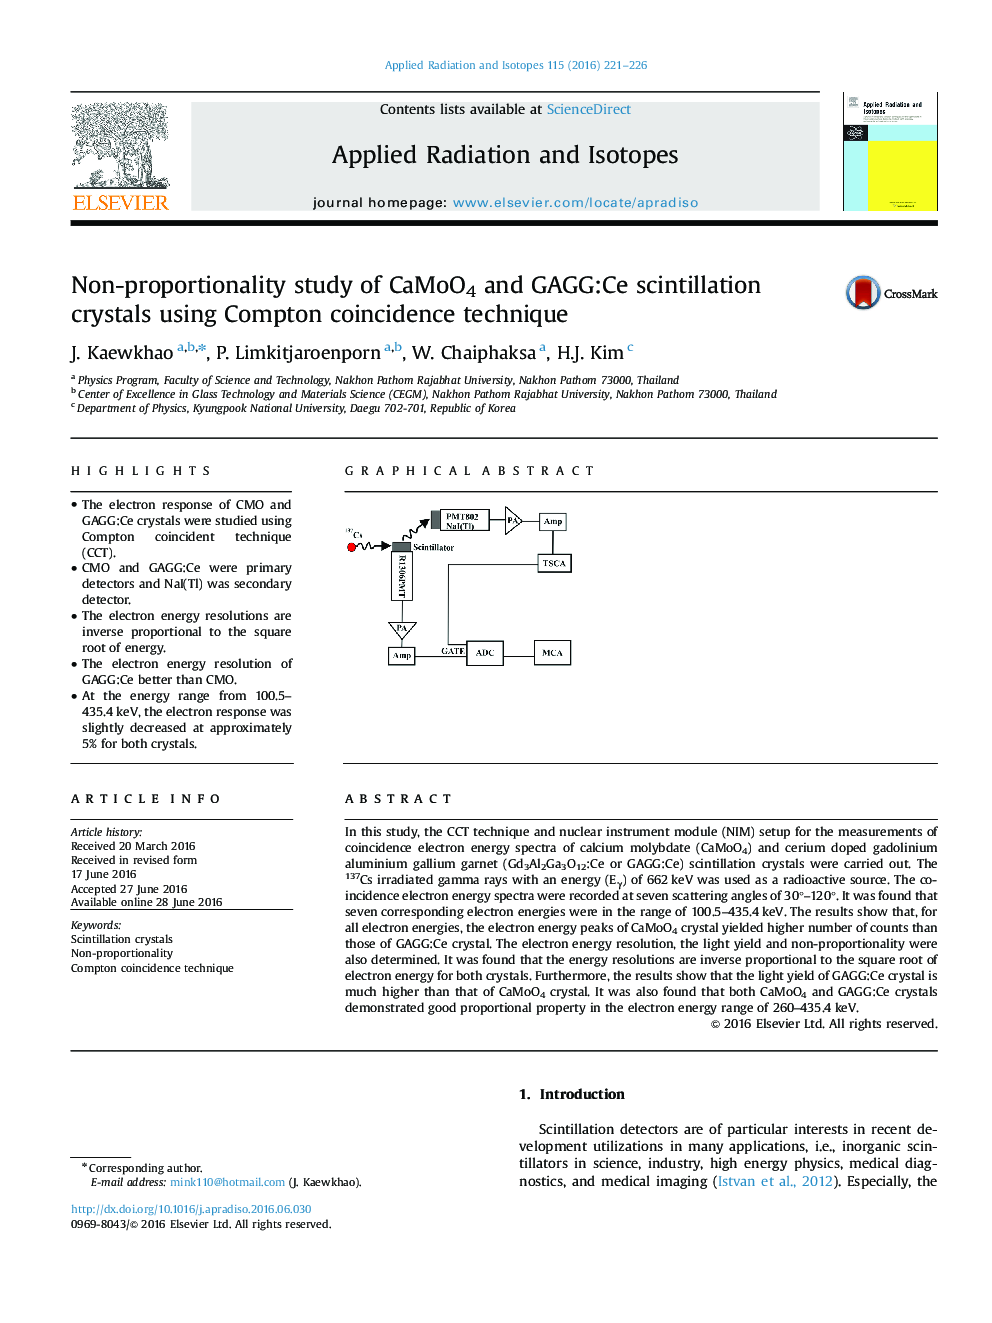 Non-proportionality study of CaMoO4 and GAGG:Ce scintillation crystals using Compton coincidence technique